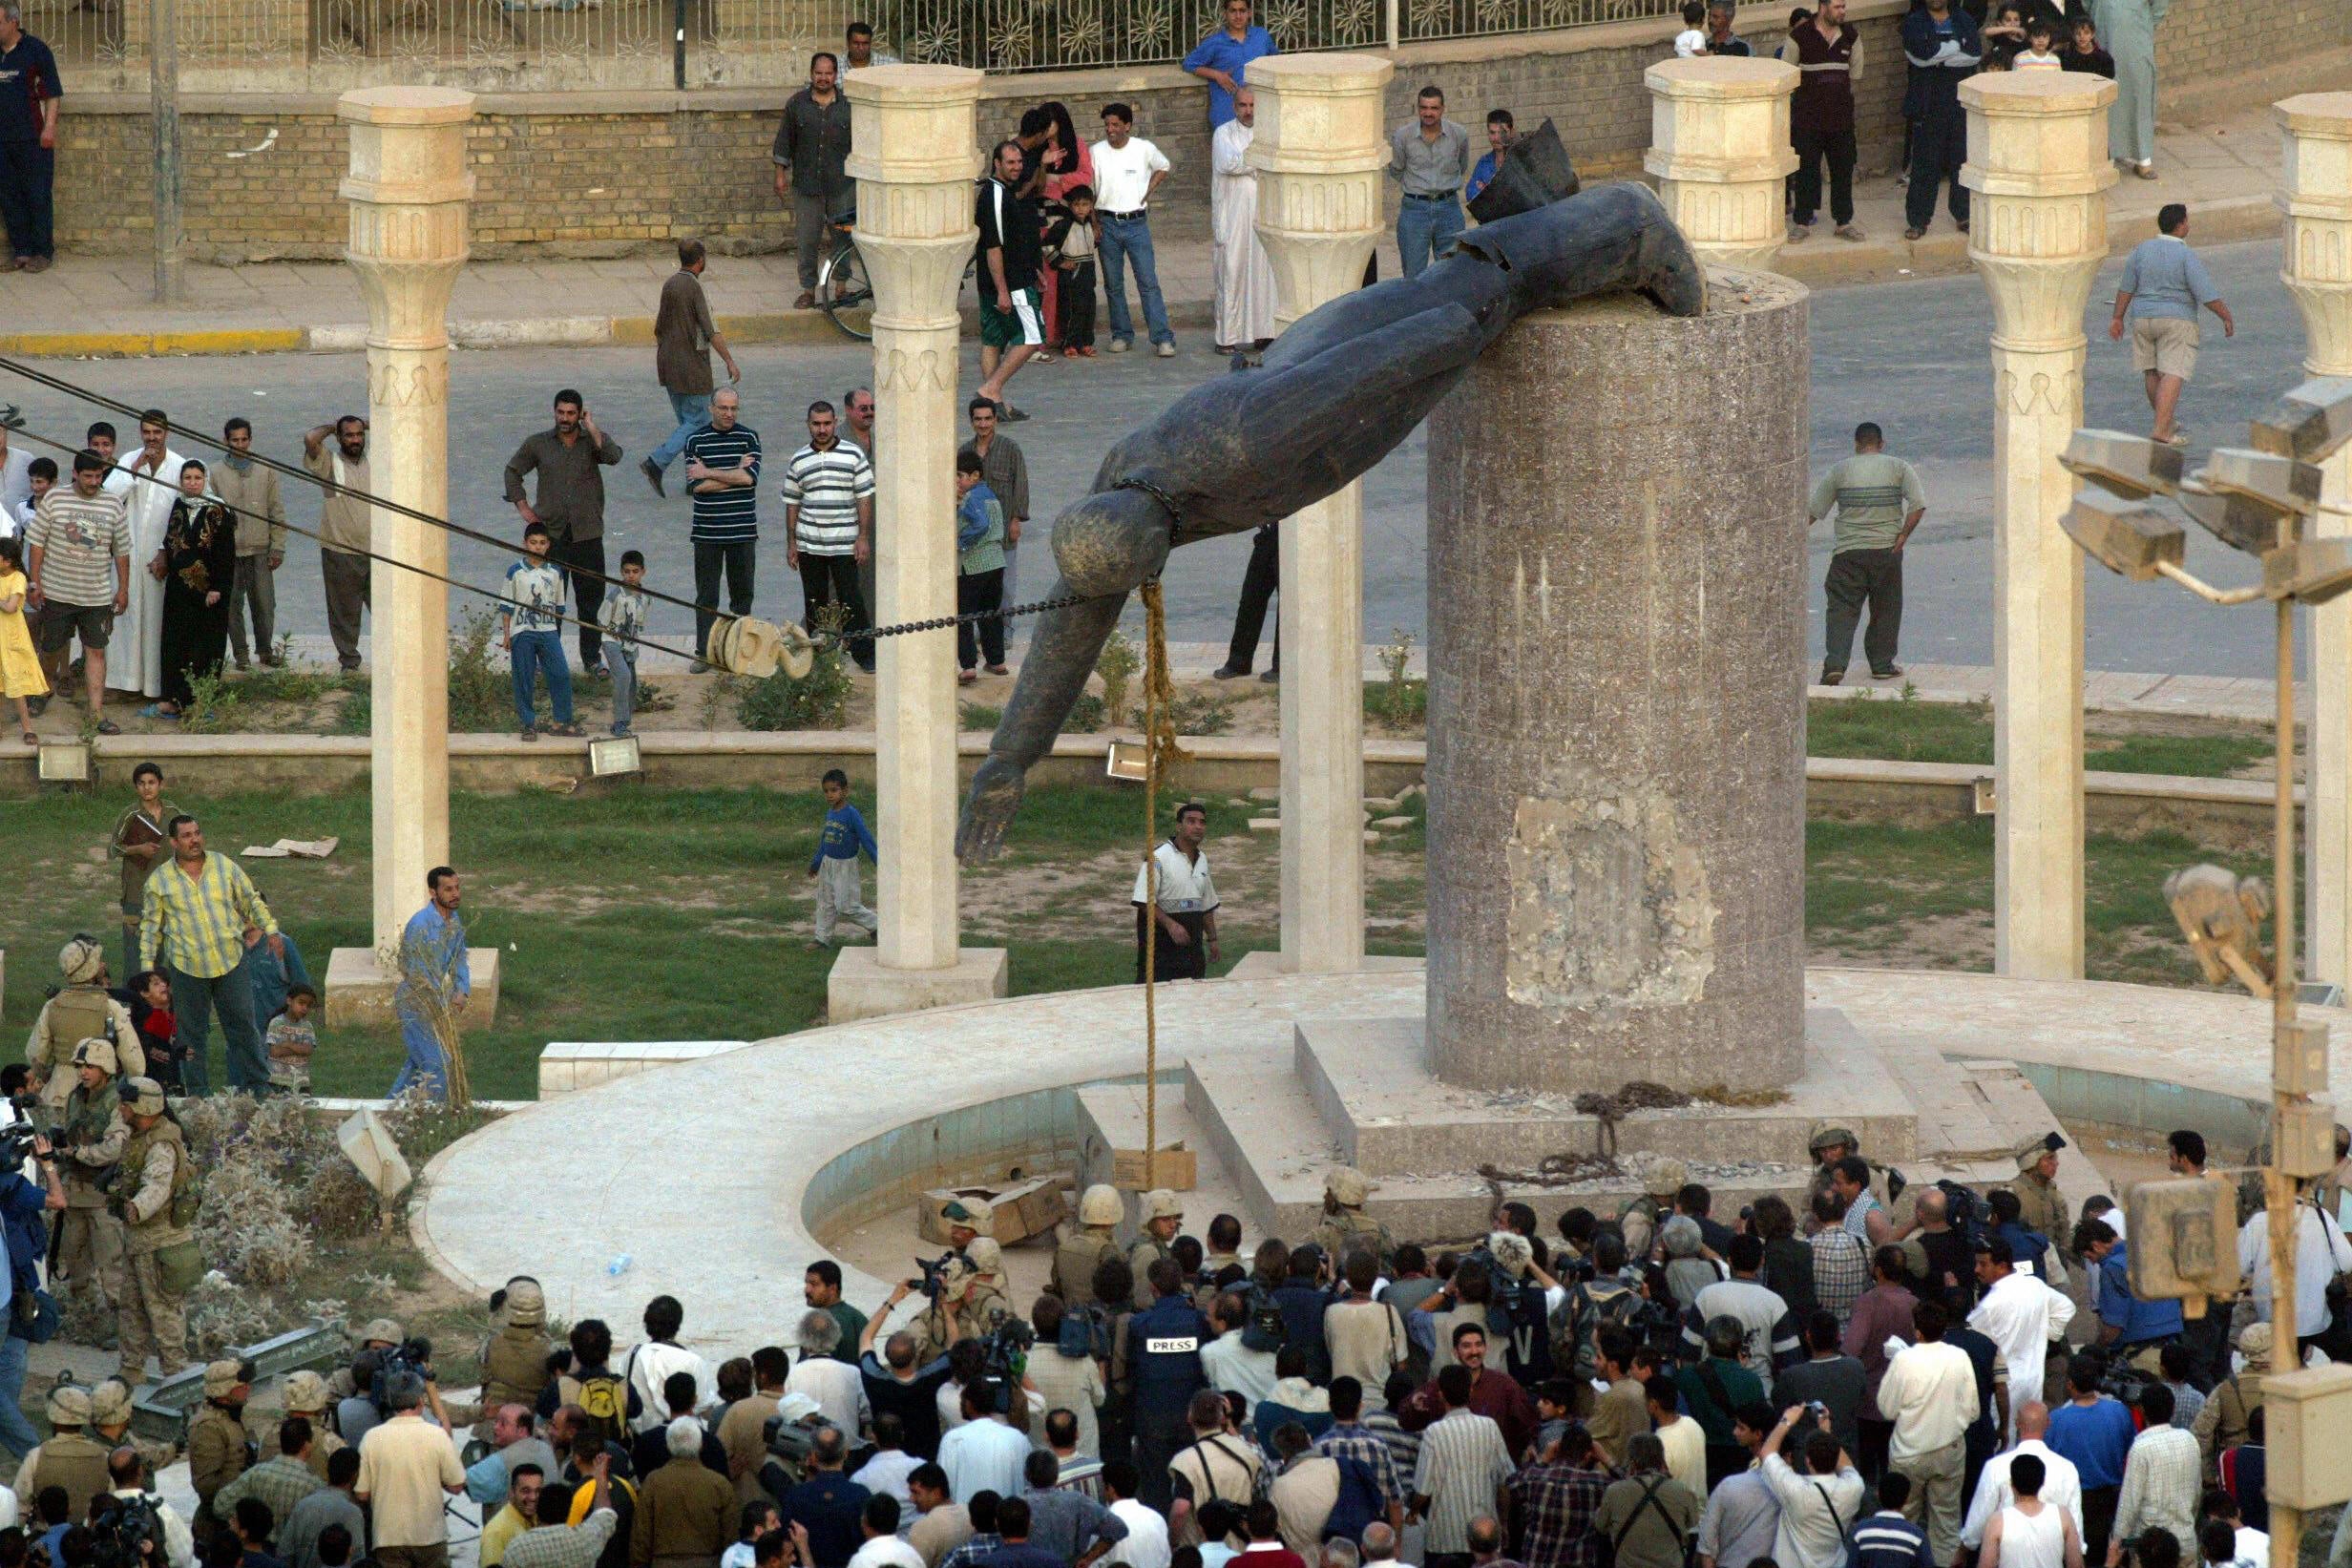 Iraqis surround a statue of Saddam Hussein in Baghdad on April 9, 2003.